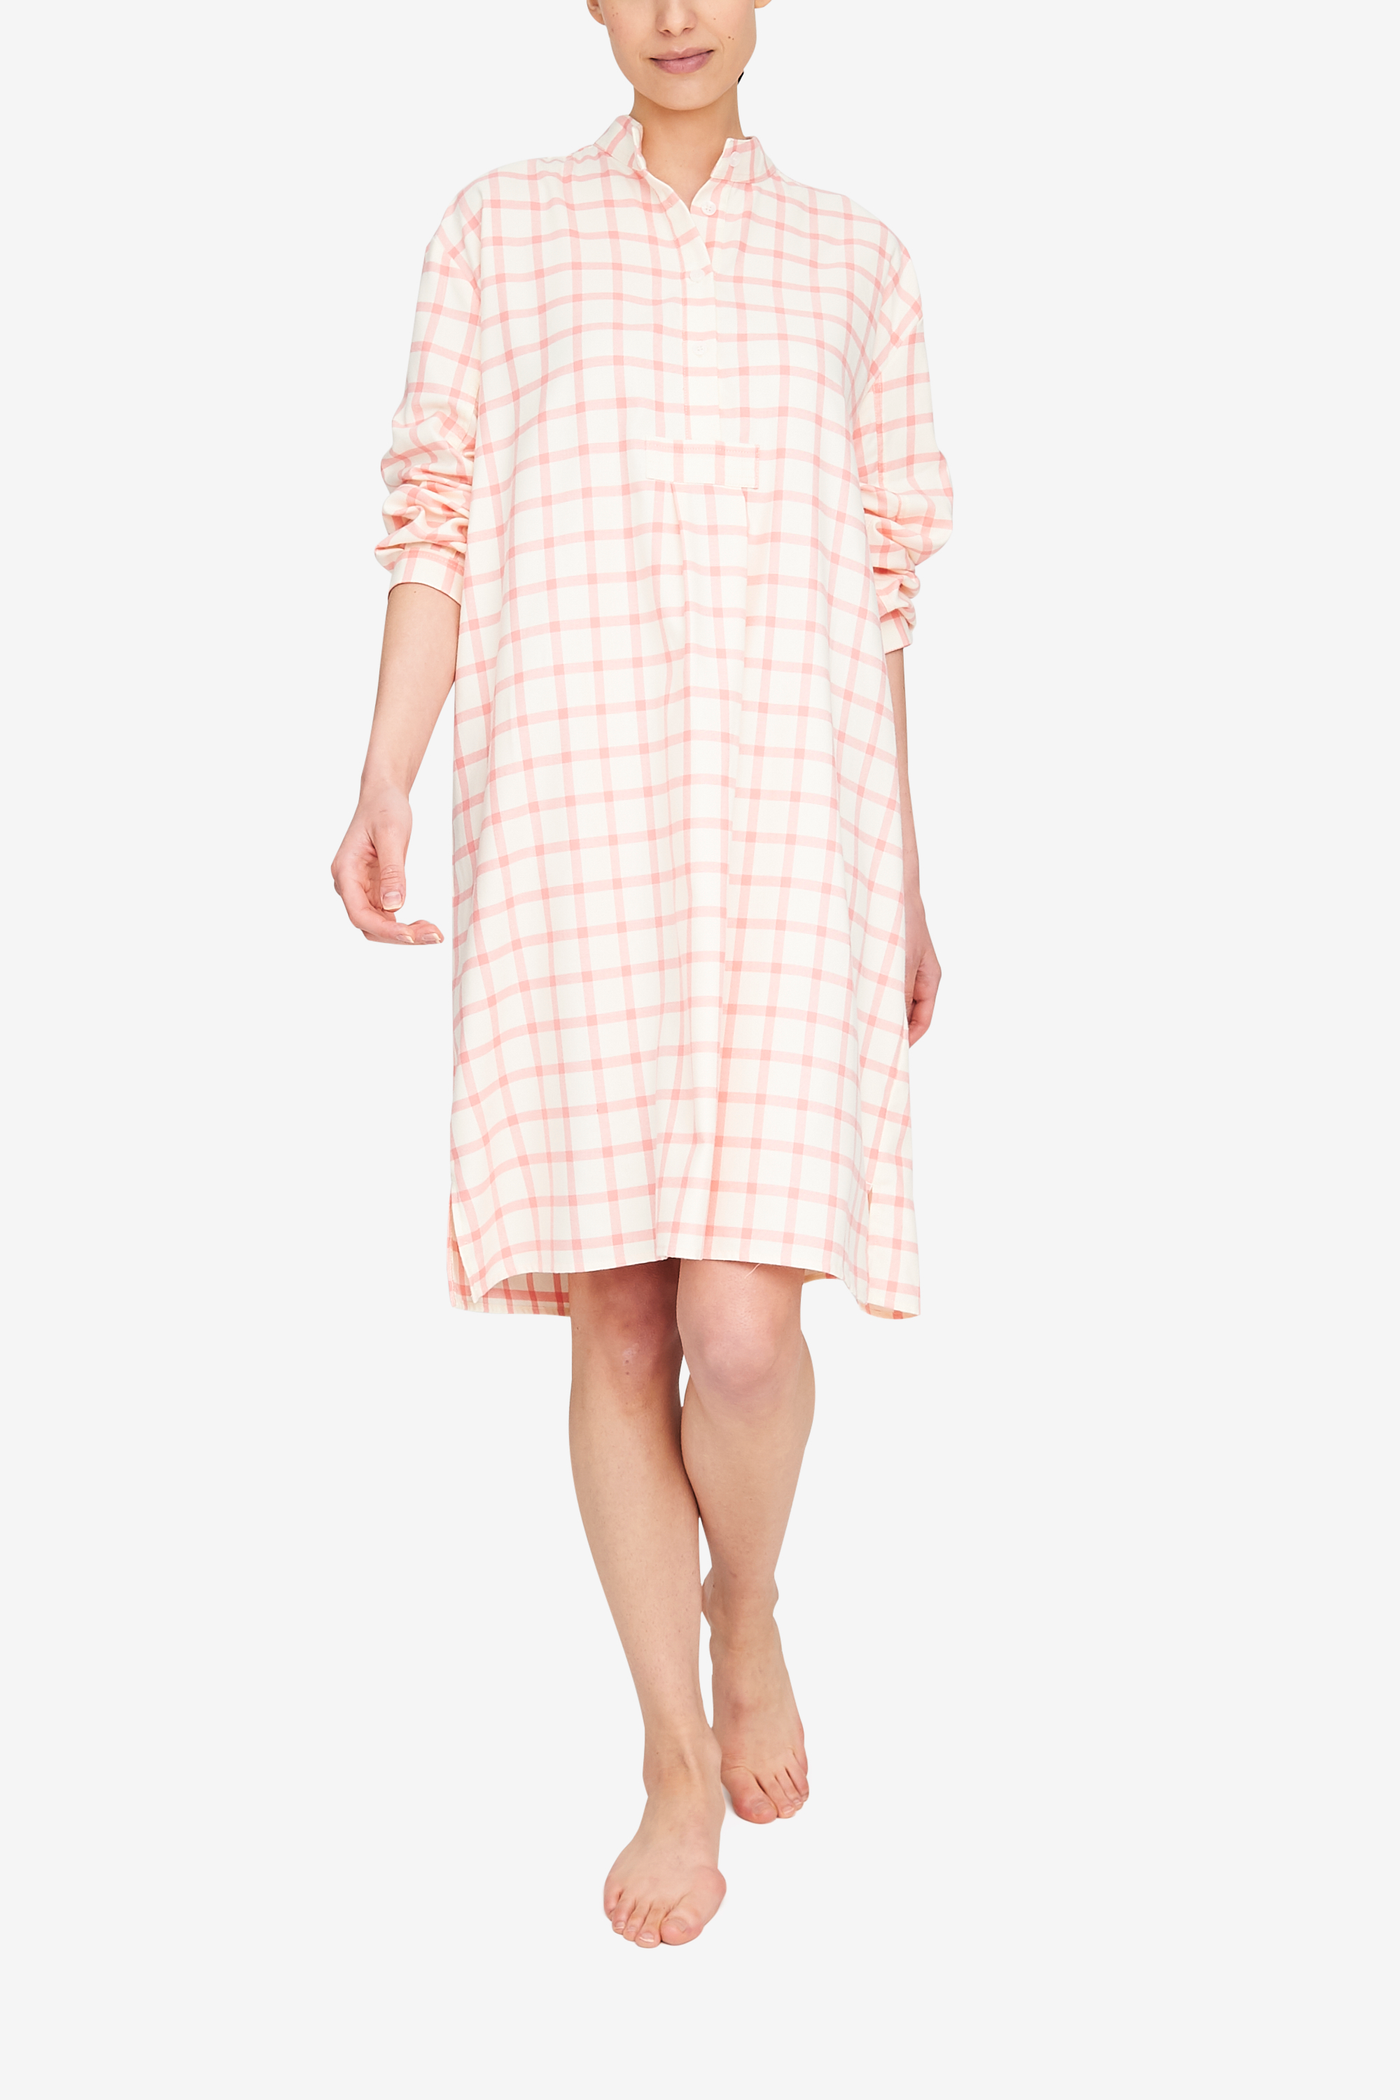 Woman wearing a cream and pink check sleep shirt made in the softest flannel. Long sleeves,  knee length, stand collar.